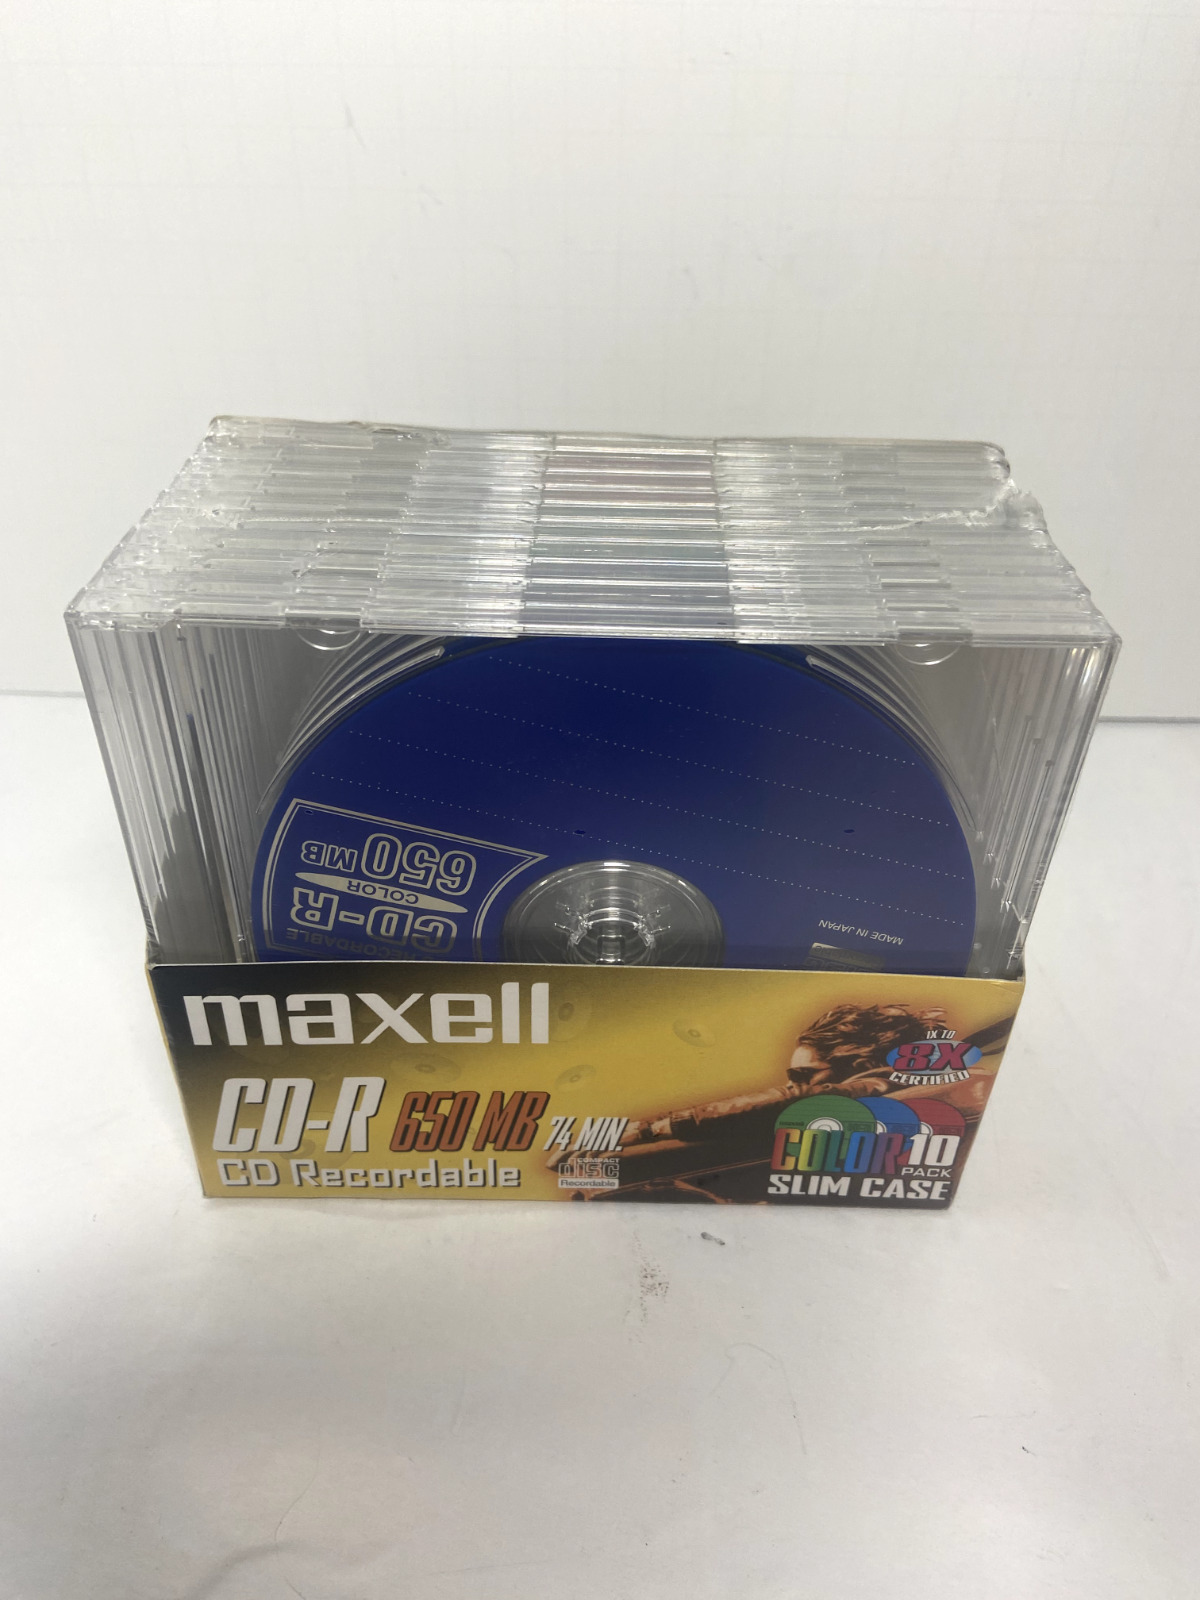 MAXELL CD-R74 650MB 74 Min. Recordable CD 10 Pack New